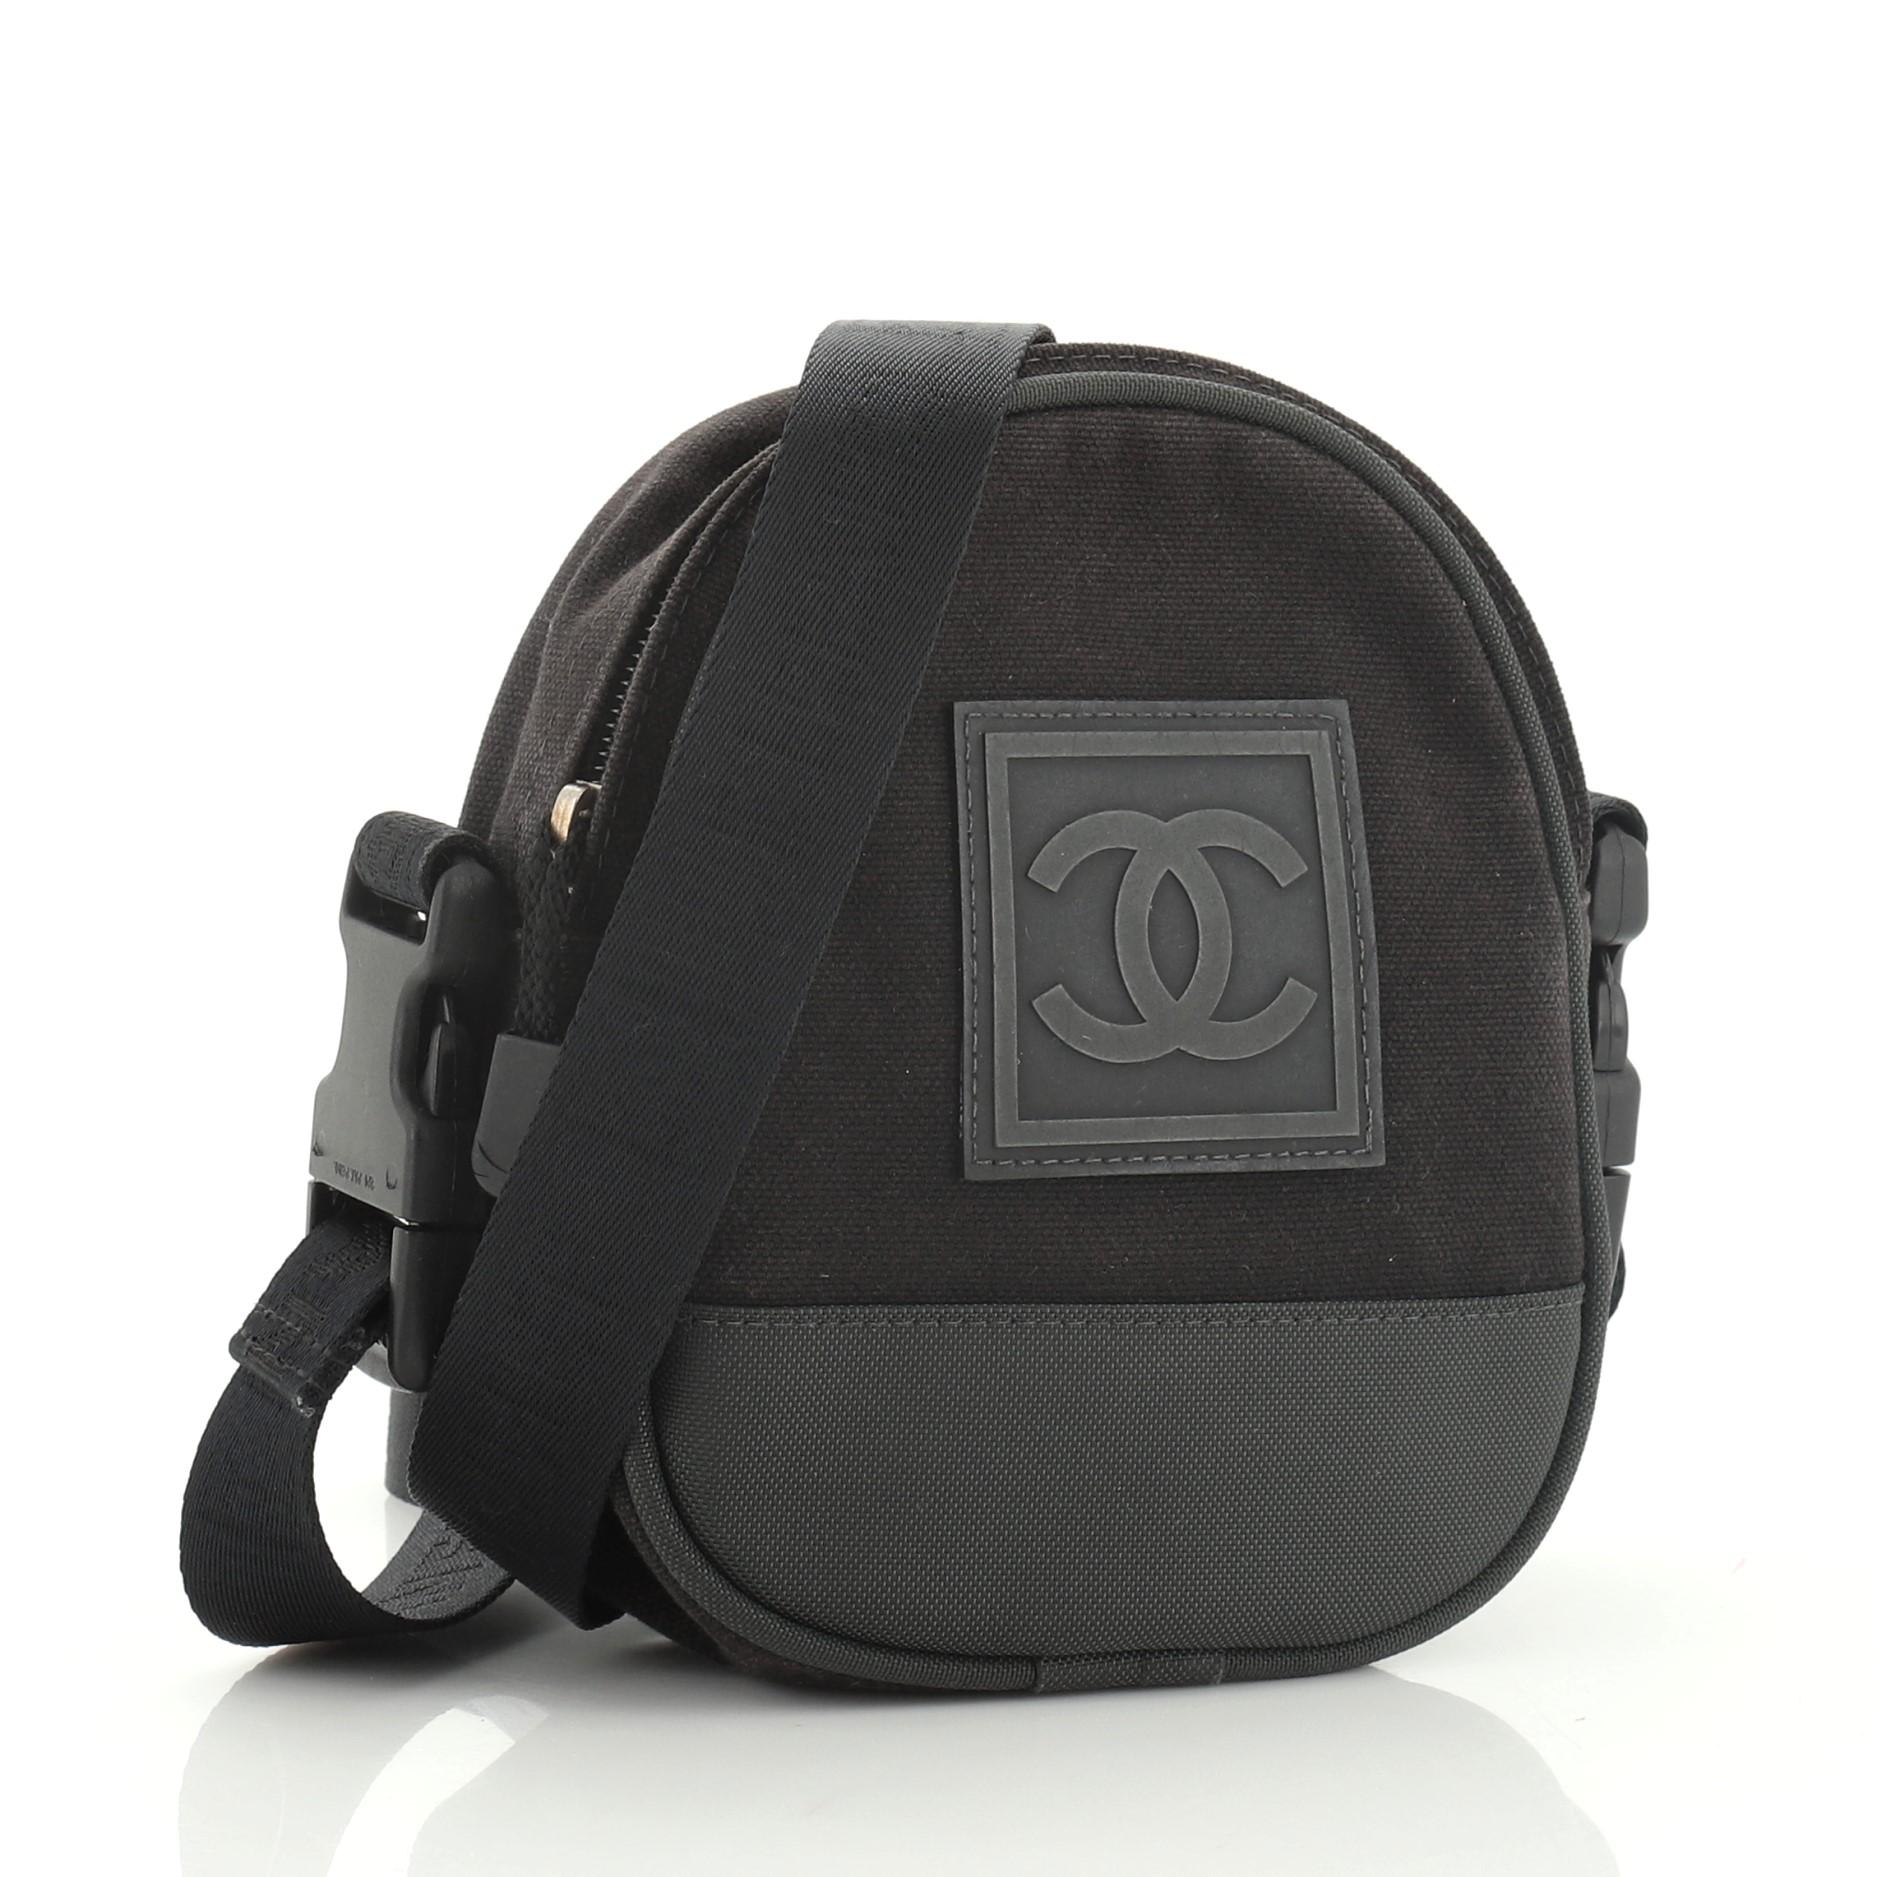 This Chanel Sport Line Crossbody Bag Nylon Mini, crafted from black and green nylon, features a removable canvas strap, CC logo on the front, and silver-tone hardware. Its zip closure opens to a green nylon interior with slip pocket. Hologram